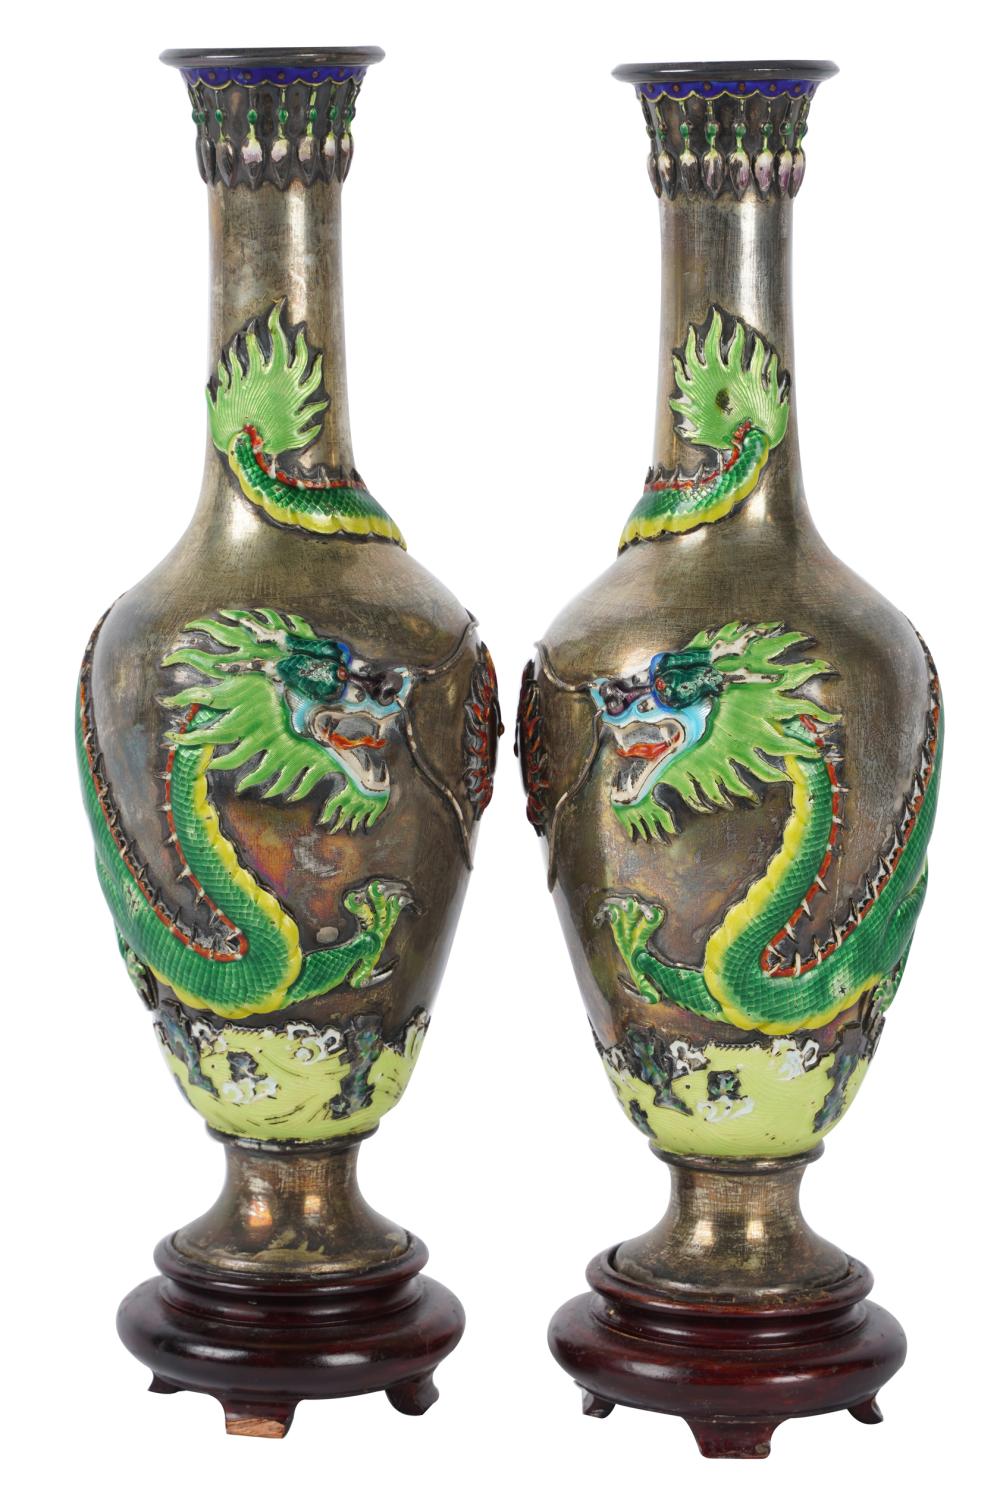 PAIR OF JAPANESE SILVER & CLOISONNE